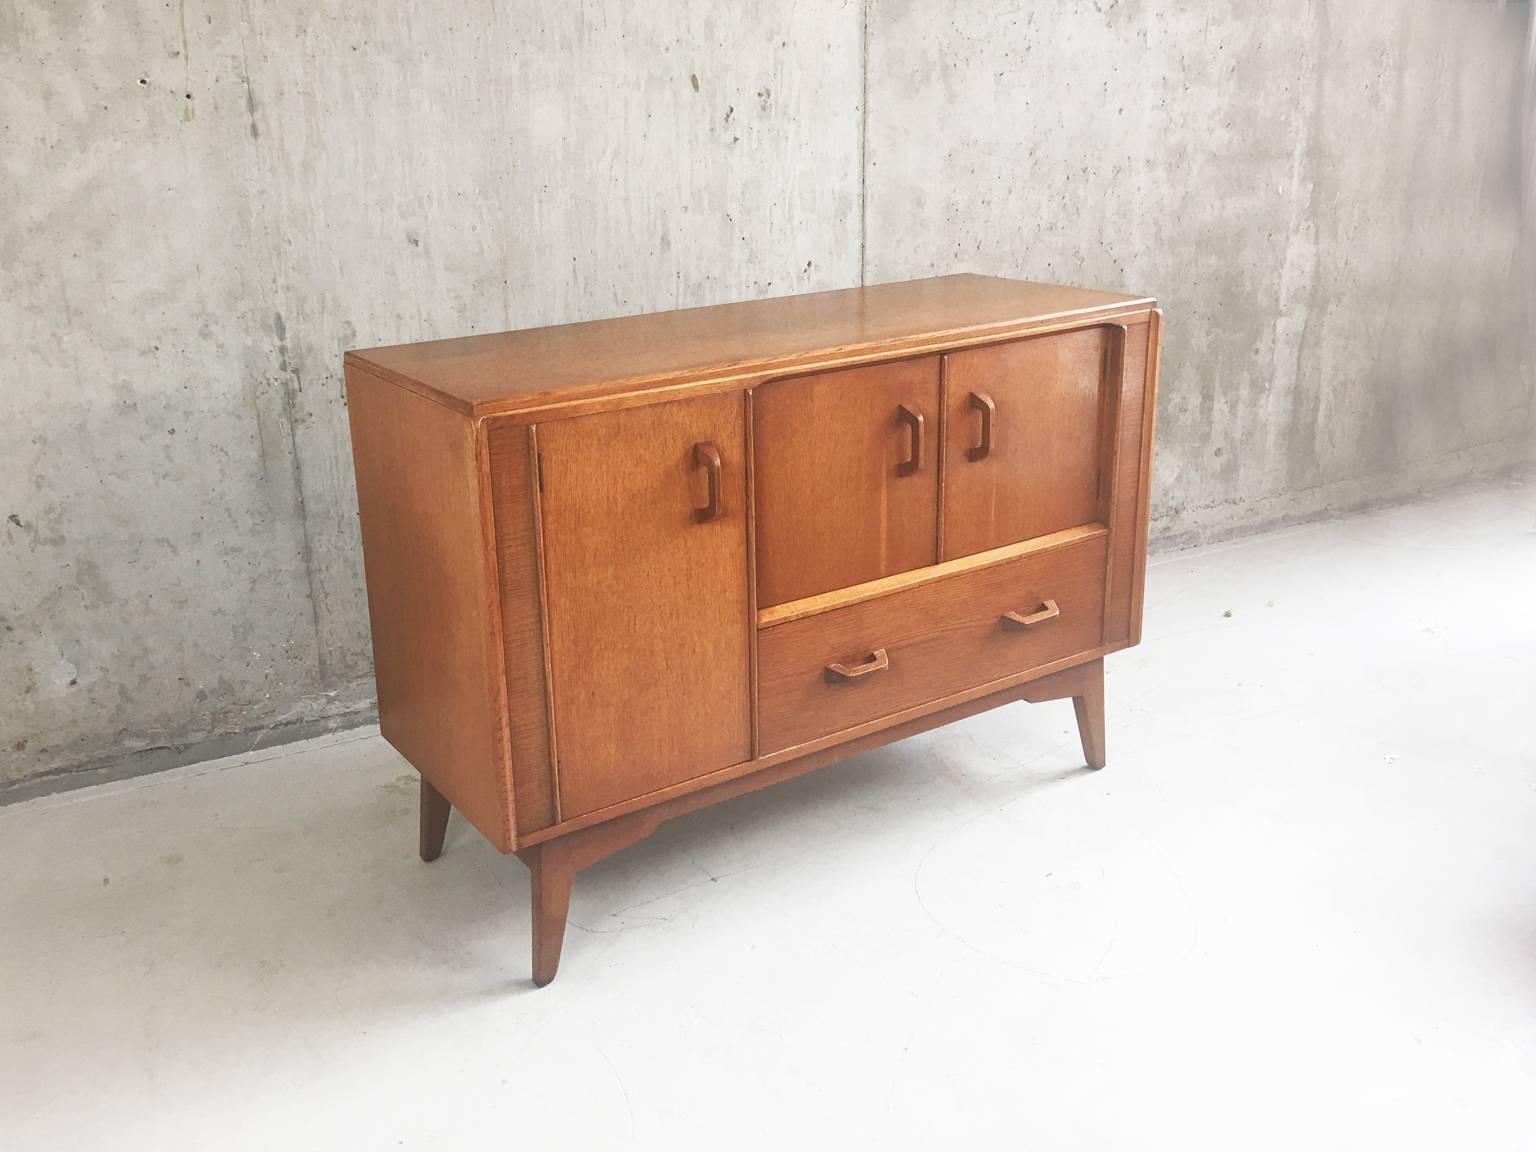 This G Plan E Gomme gold stamped chest of drawers/sideboard/cabinet dates from the 1950s-1960s and is part of the ‘Brandon’ range.

Made of light colored solid oak and oak veneer to the very high E Gomme standards, it is very strong and sturdy and